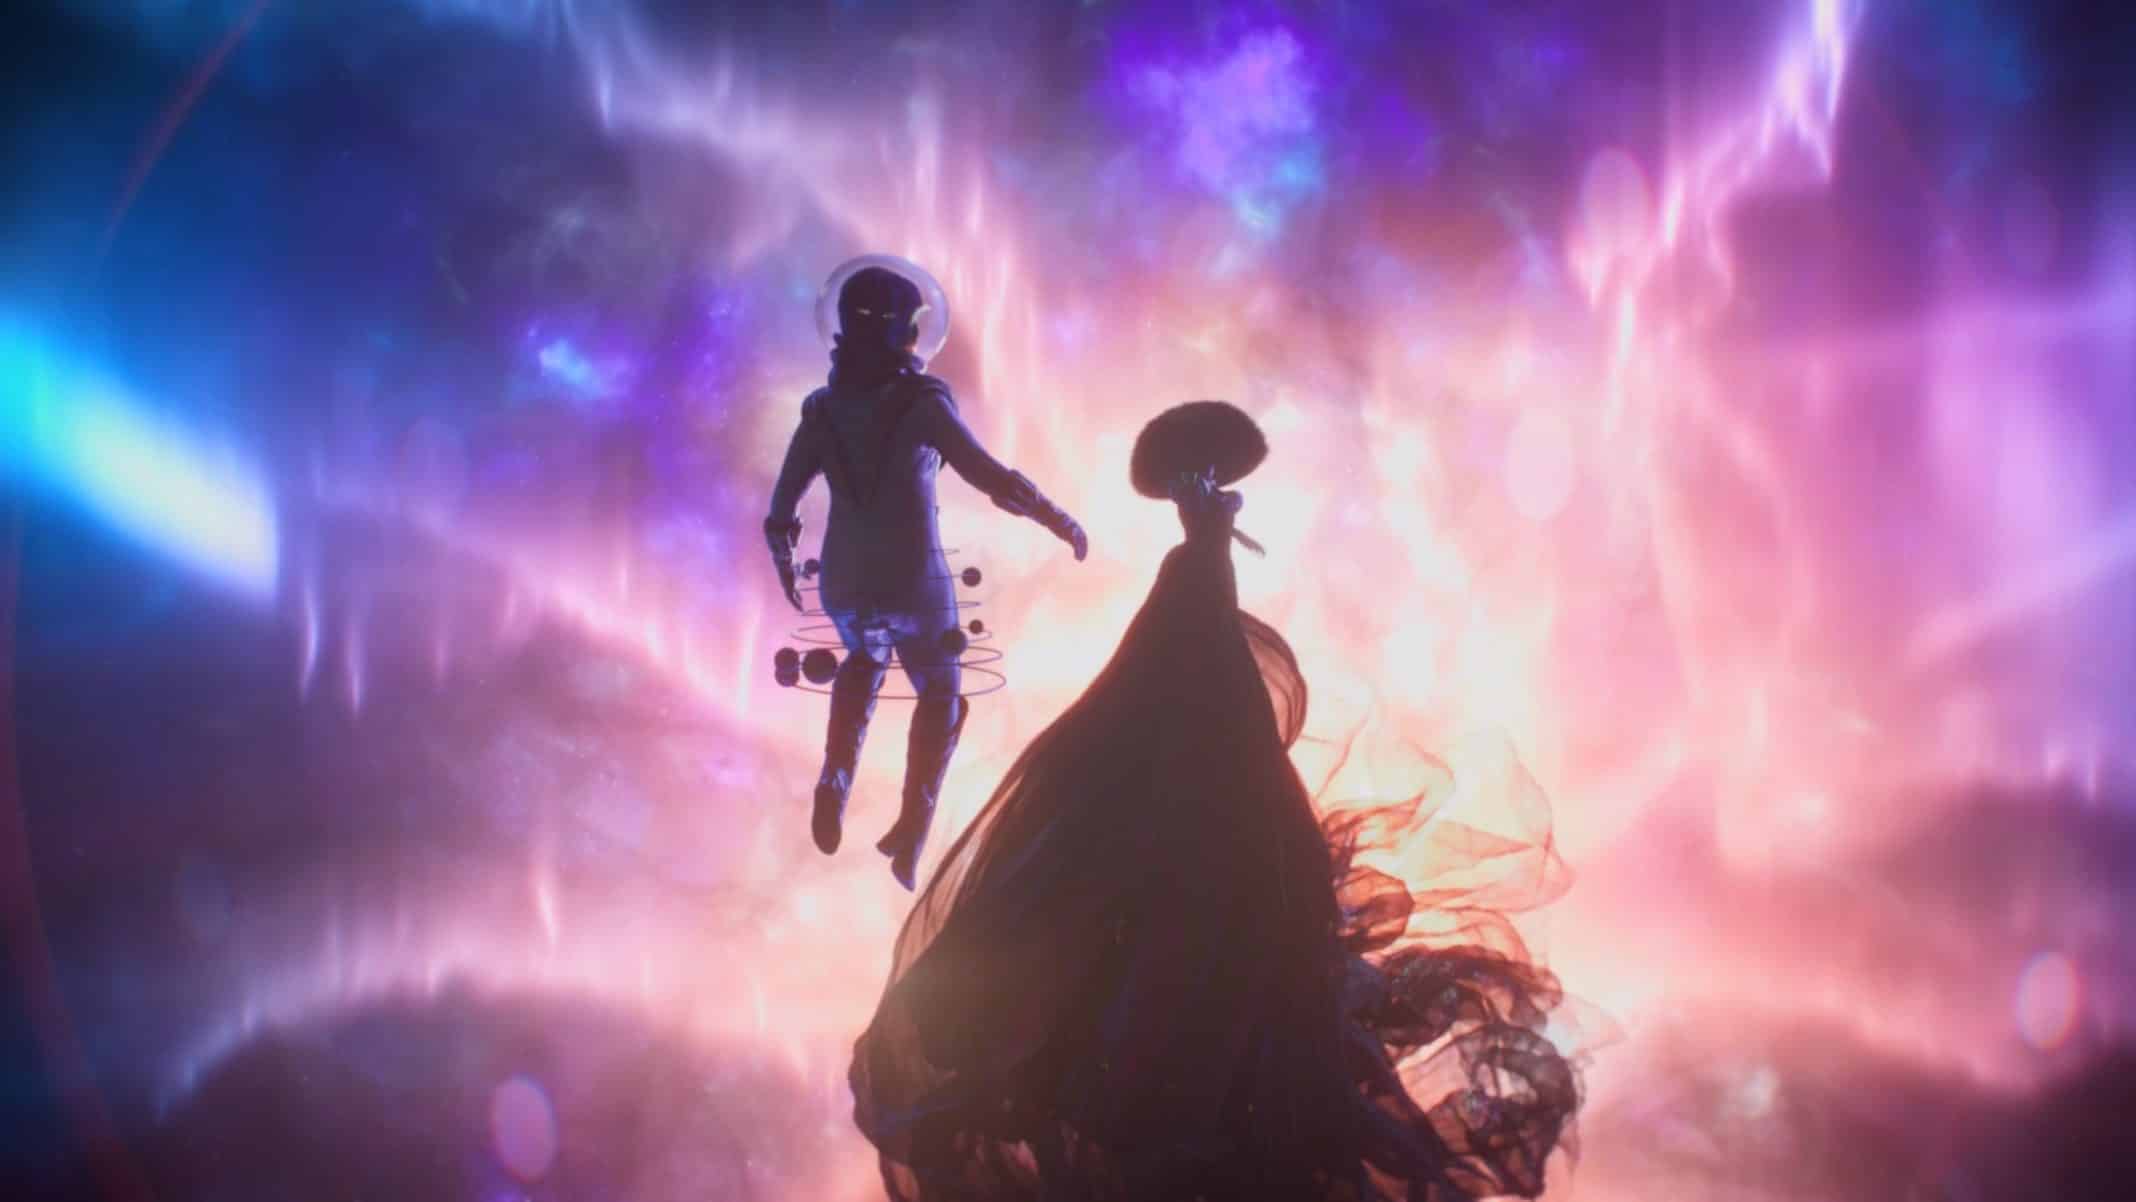 Some of the celestial imagery in the episode.